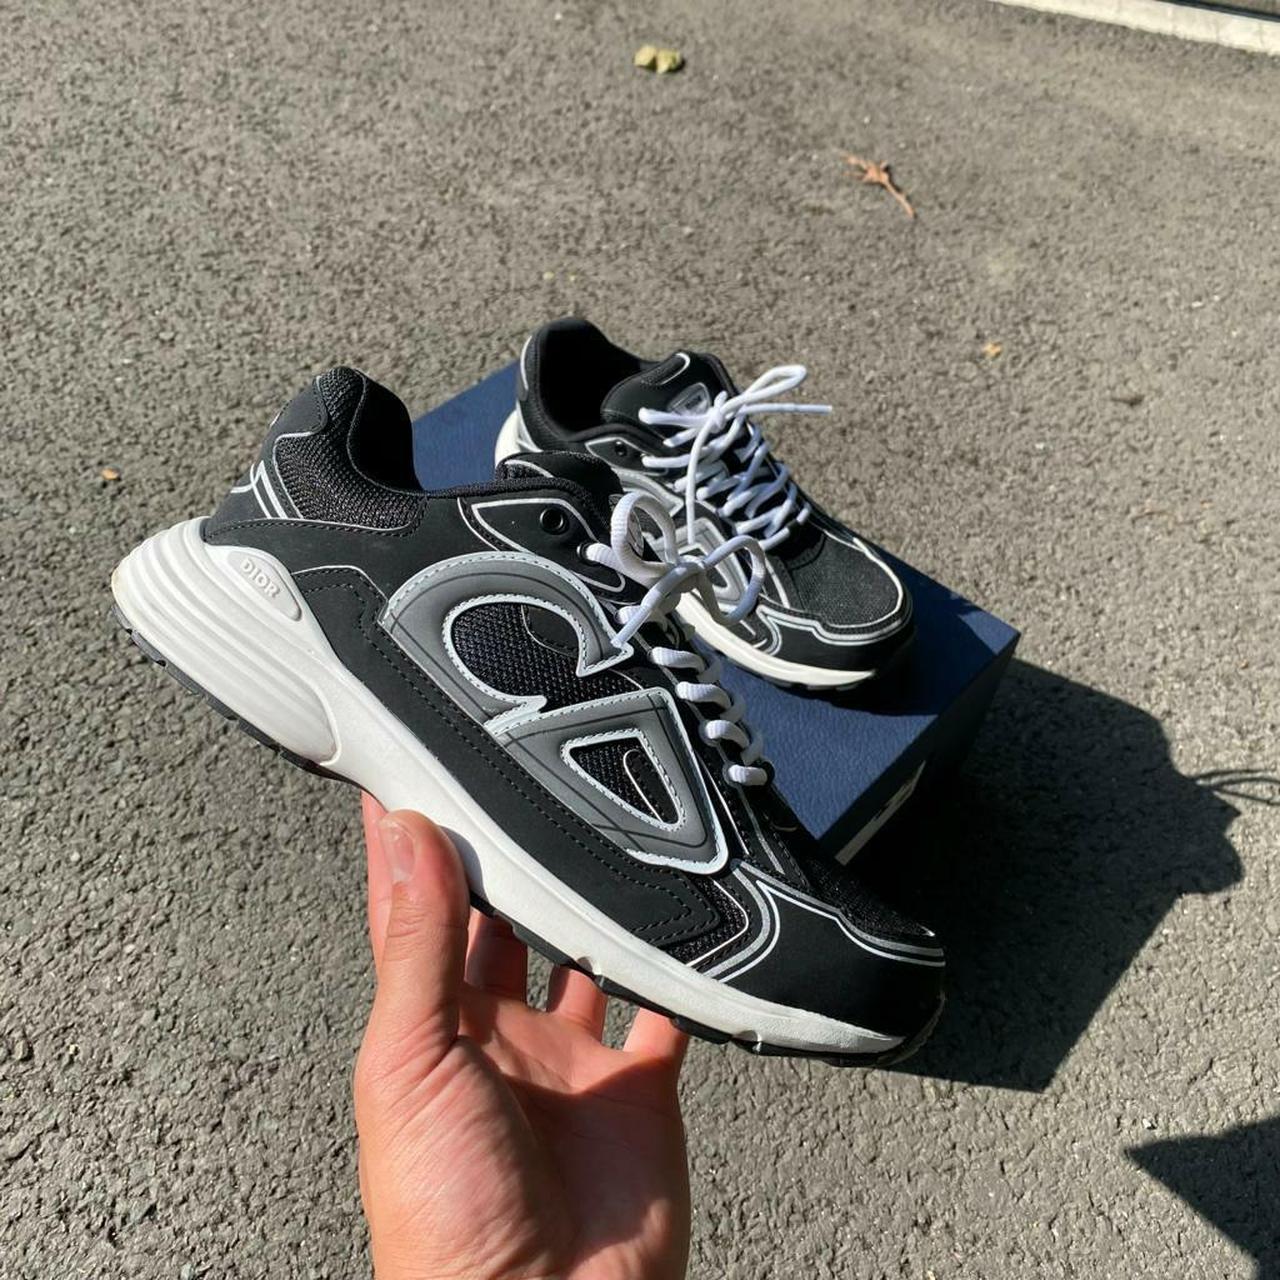 Dior b30 sneaker. UK 8 but fits more like a 7, these... - Depop